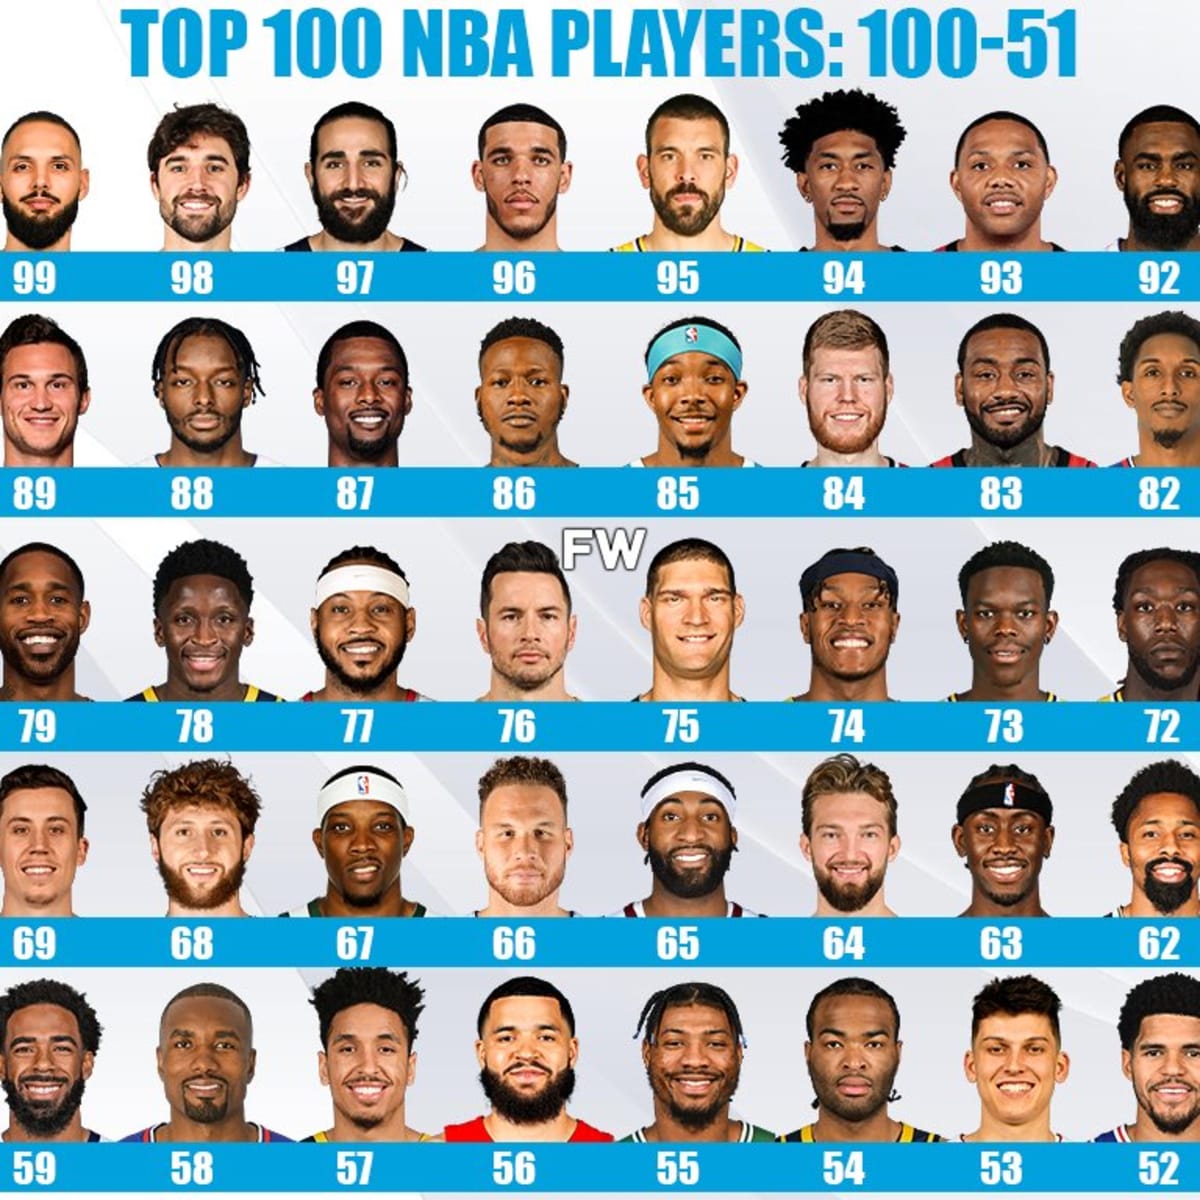 Ranked! The 100 best players of the 21st Century